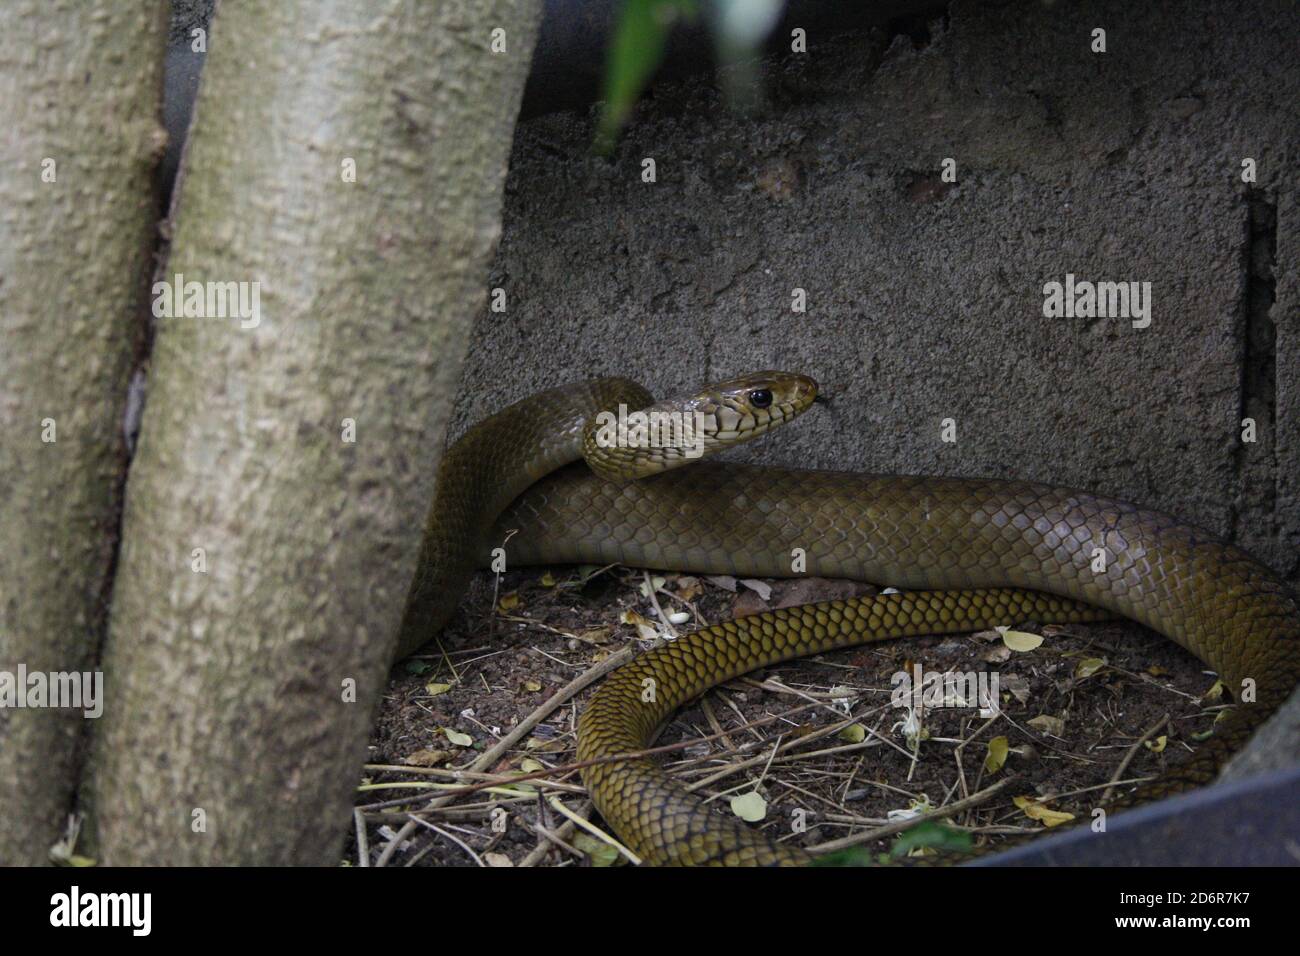 sri lankan rat snake, brown in colour, poises to strike in defense as it is cornered in garden againts the wall Stock Photo